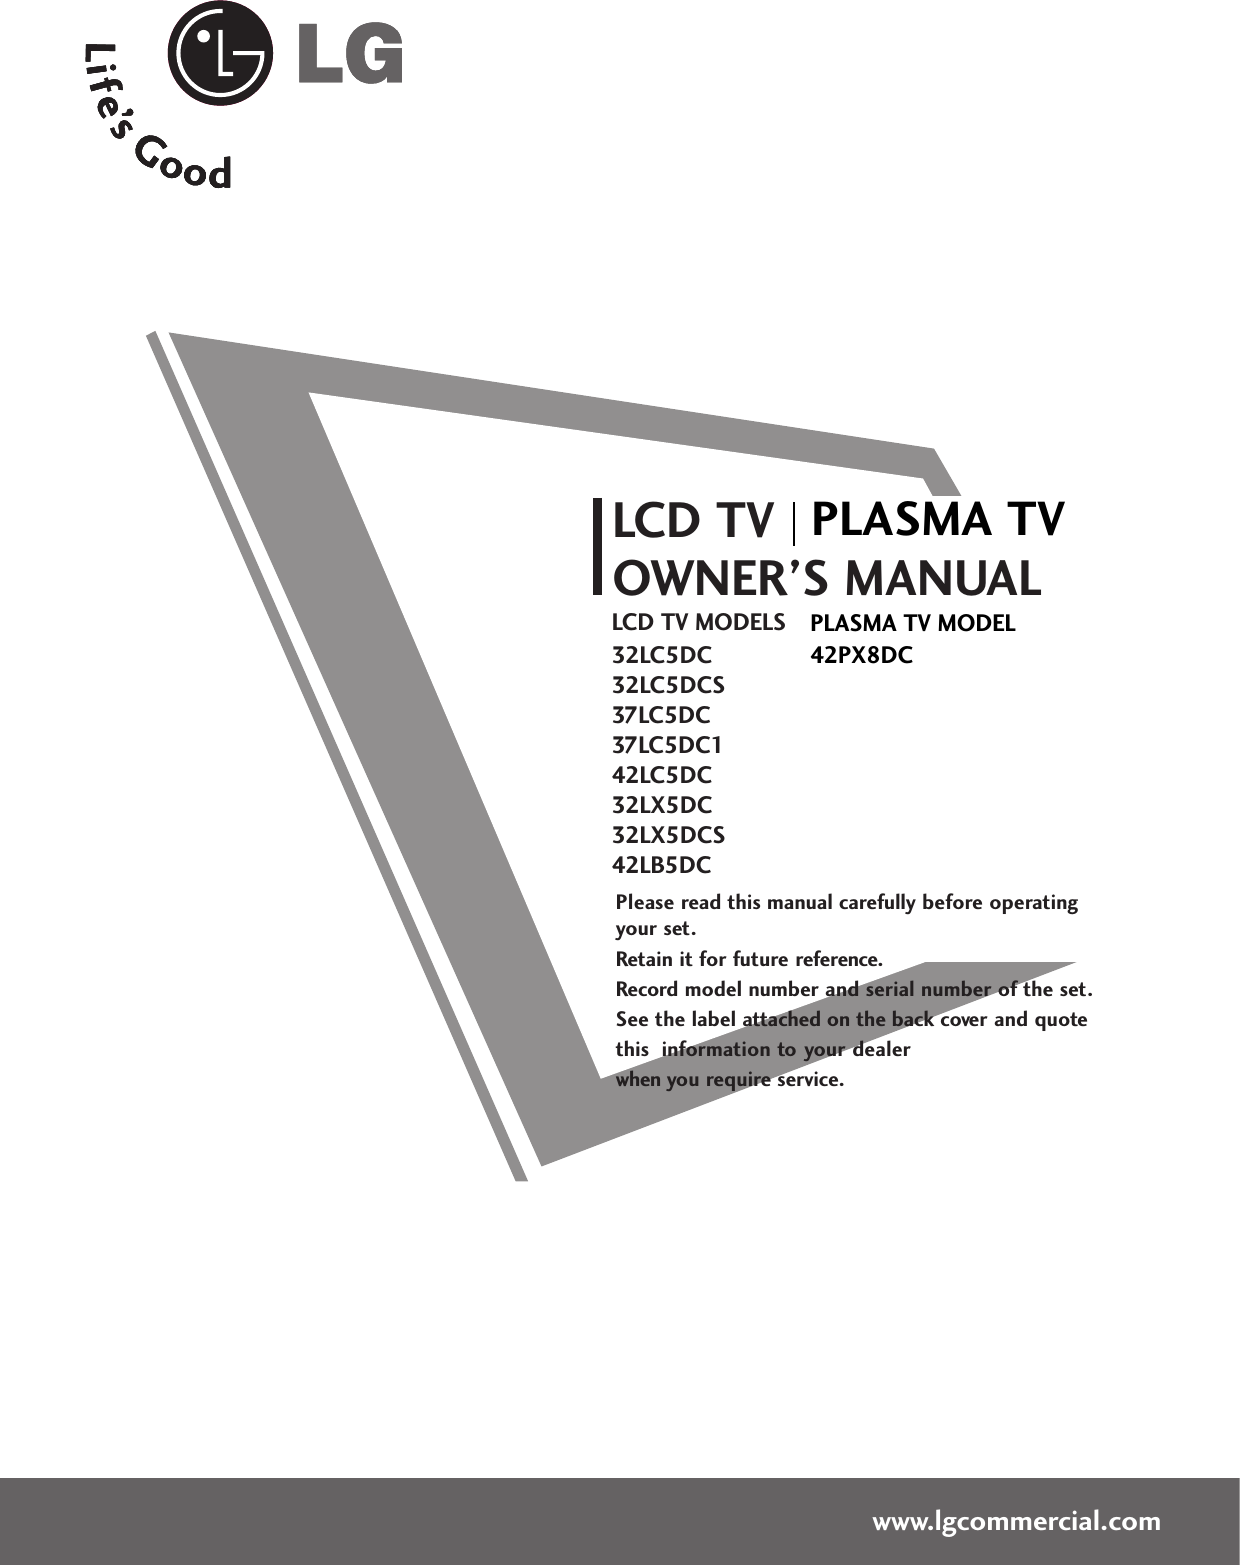 Please read this manual carefully before operatingyour set. Retain it for future reference.Record model number and serial number of the set. See the label attached on the back cover and quote this  information to your dealer when you require service.LCD TVOWNER’S MANUALLCD TV MODELS32LC5DC32LC5DCS37LC5DC37LC5DC142LC5DC32LX5DC32LX5DCS42LB5DCwww.lgcommercial.comPLASMA TV MODEL42PX8DCPLASMA TV